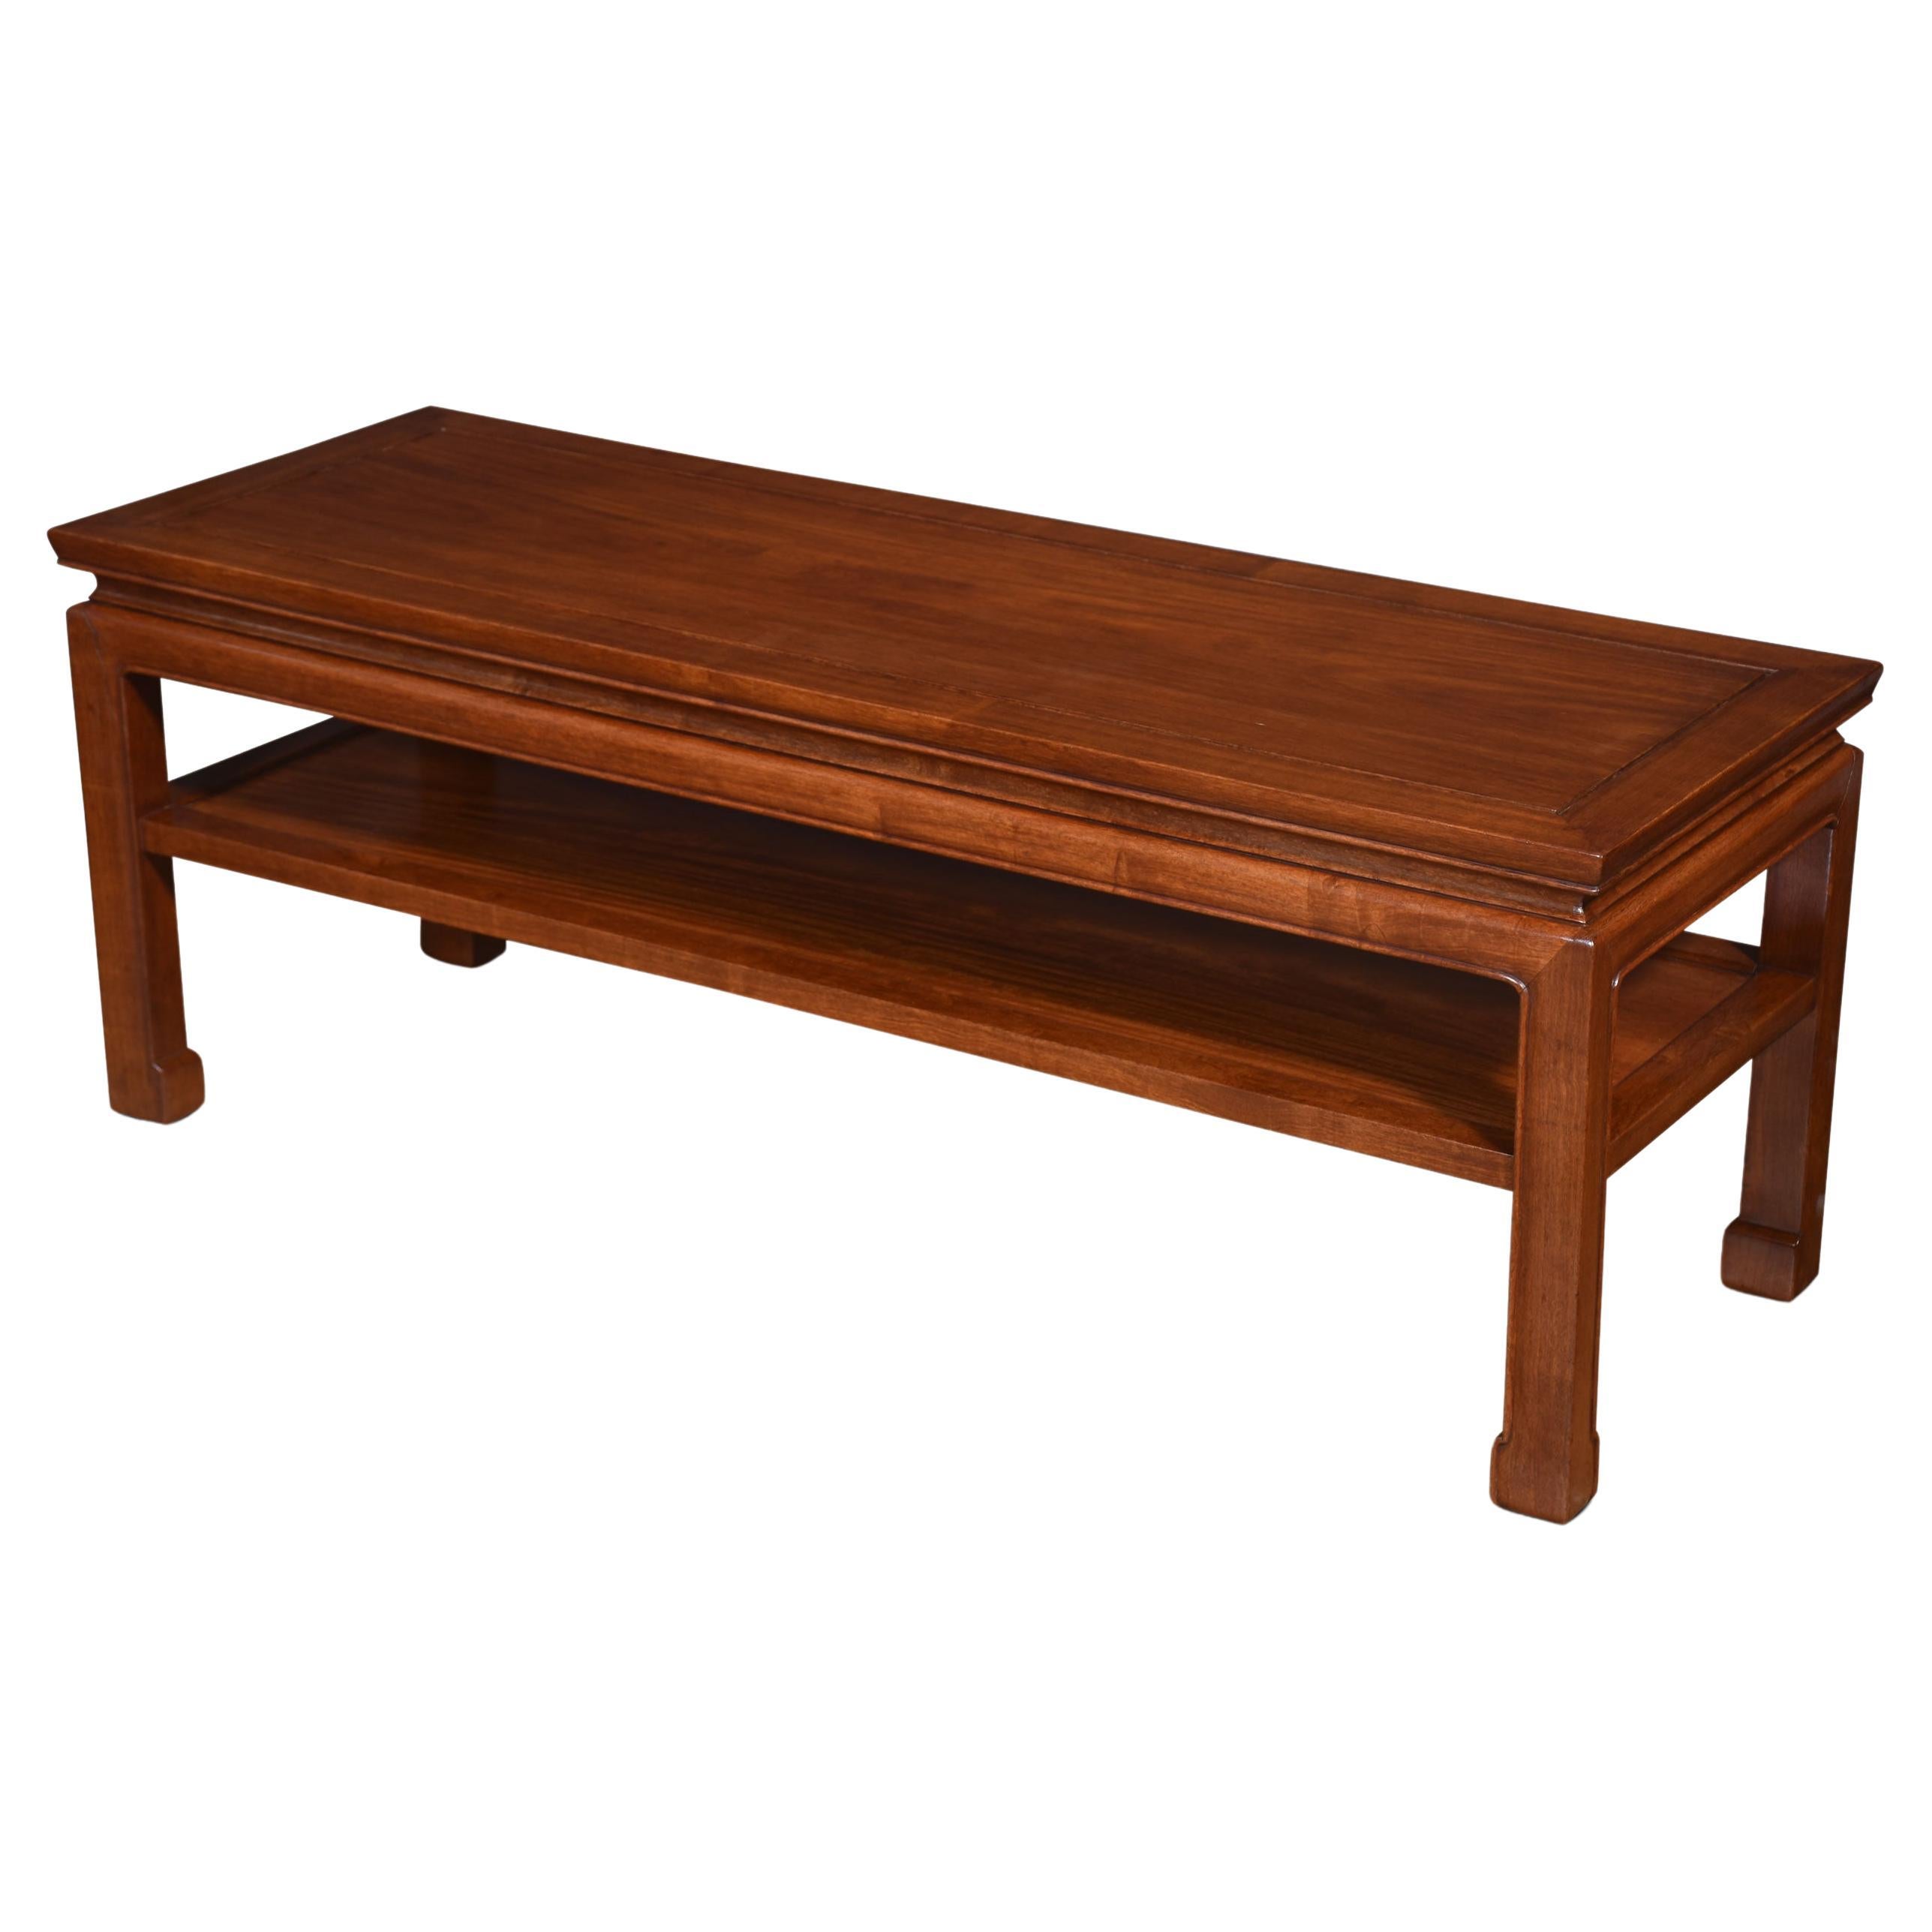 Chinese hardwood low coffee table For Sale